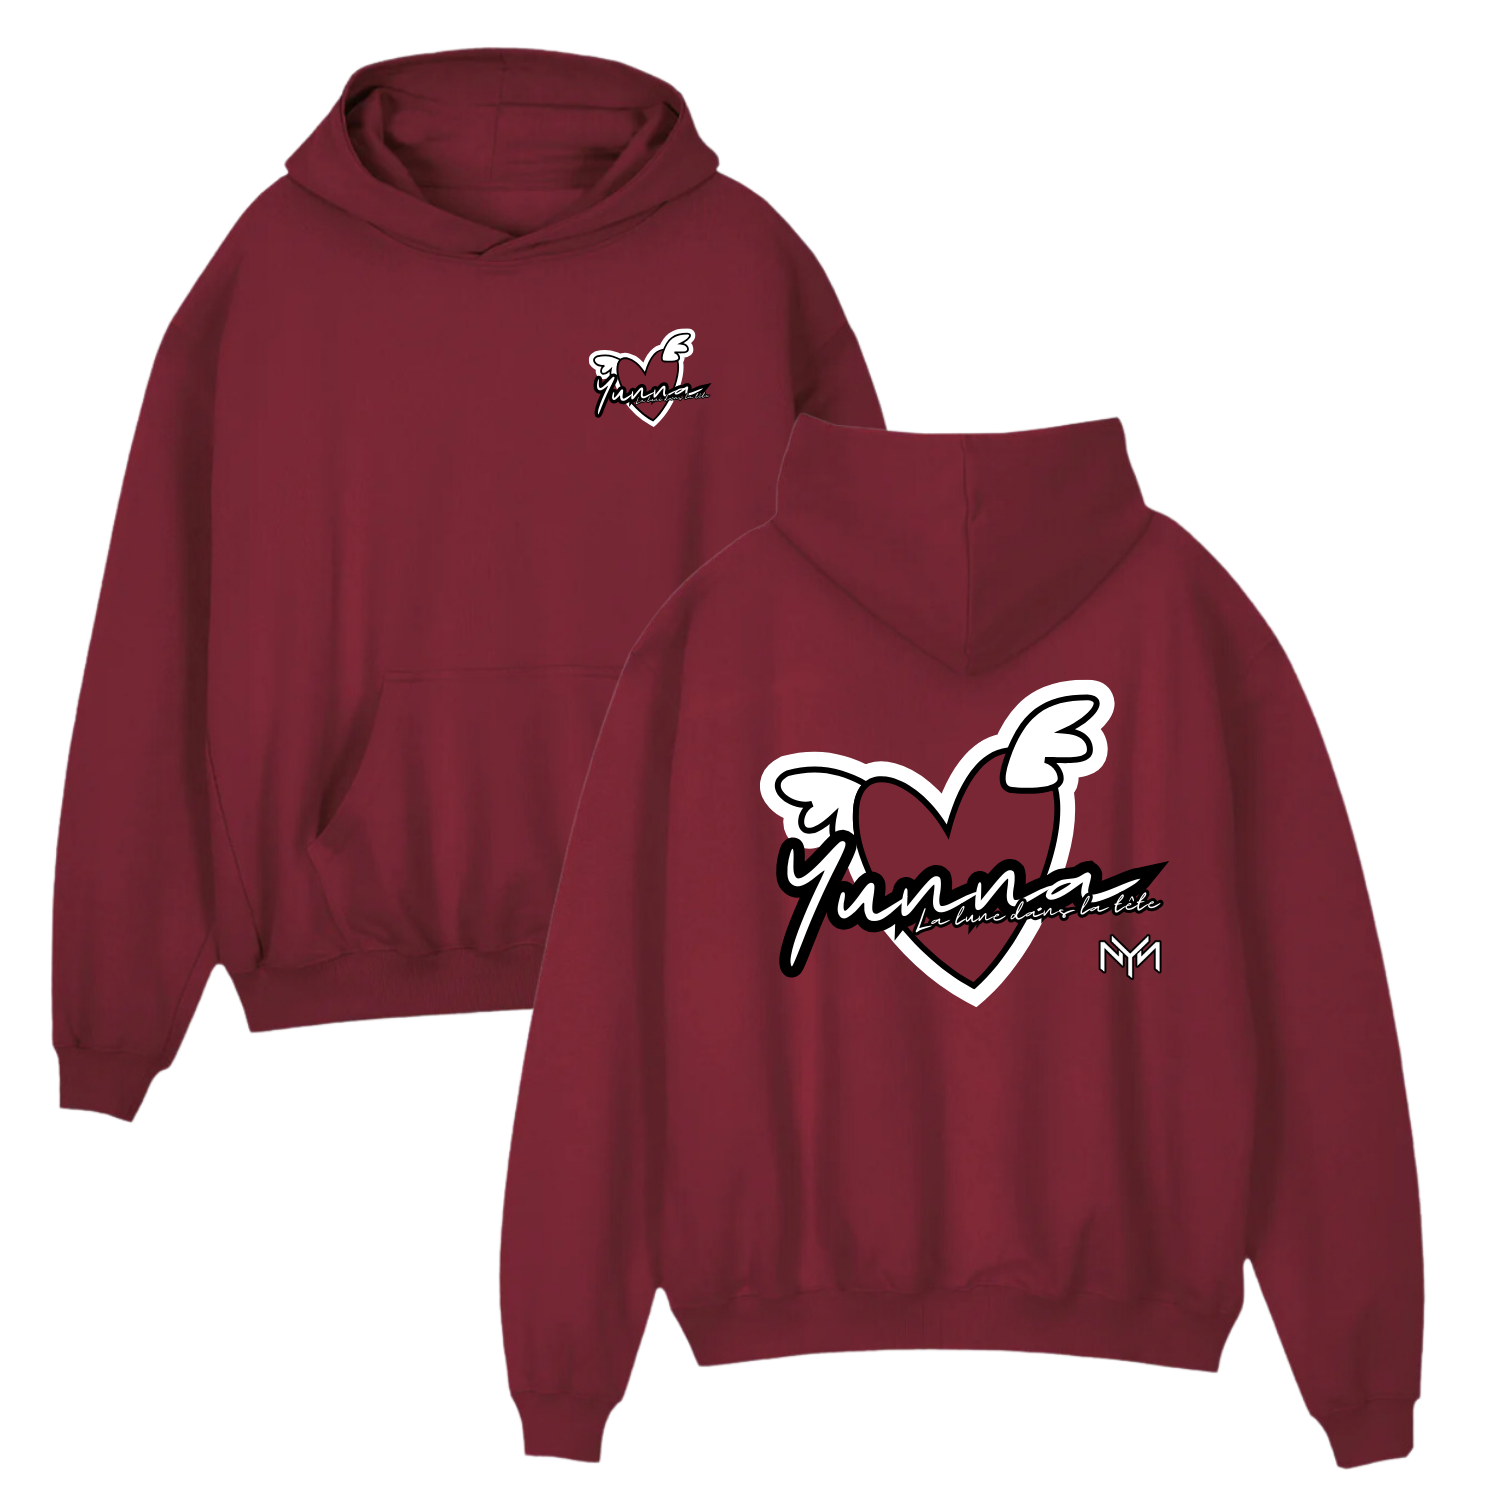 Hoodie Bordeaux - Personnalisation - Yunna France